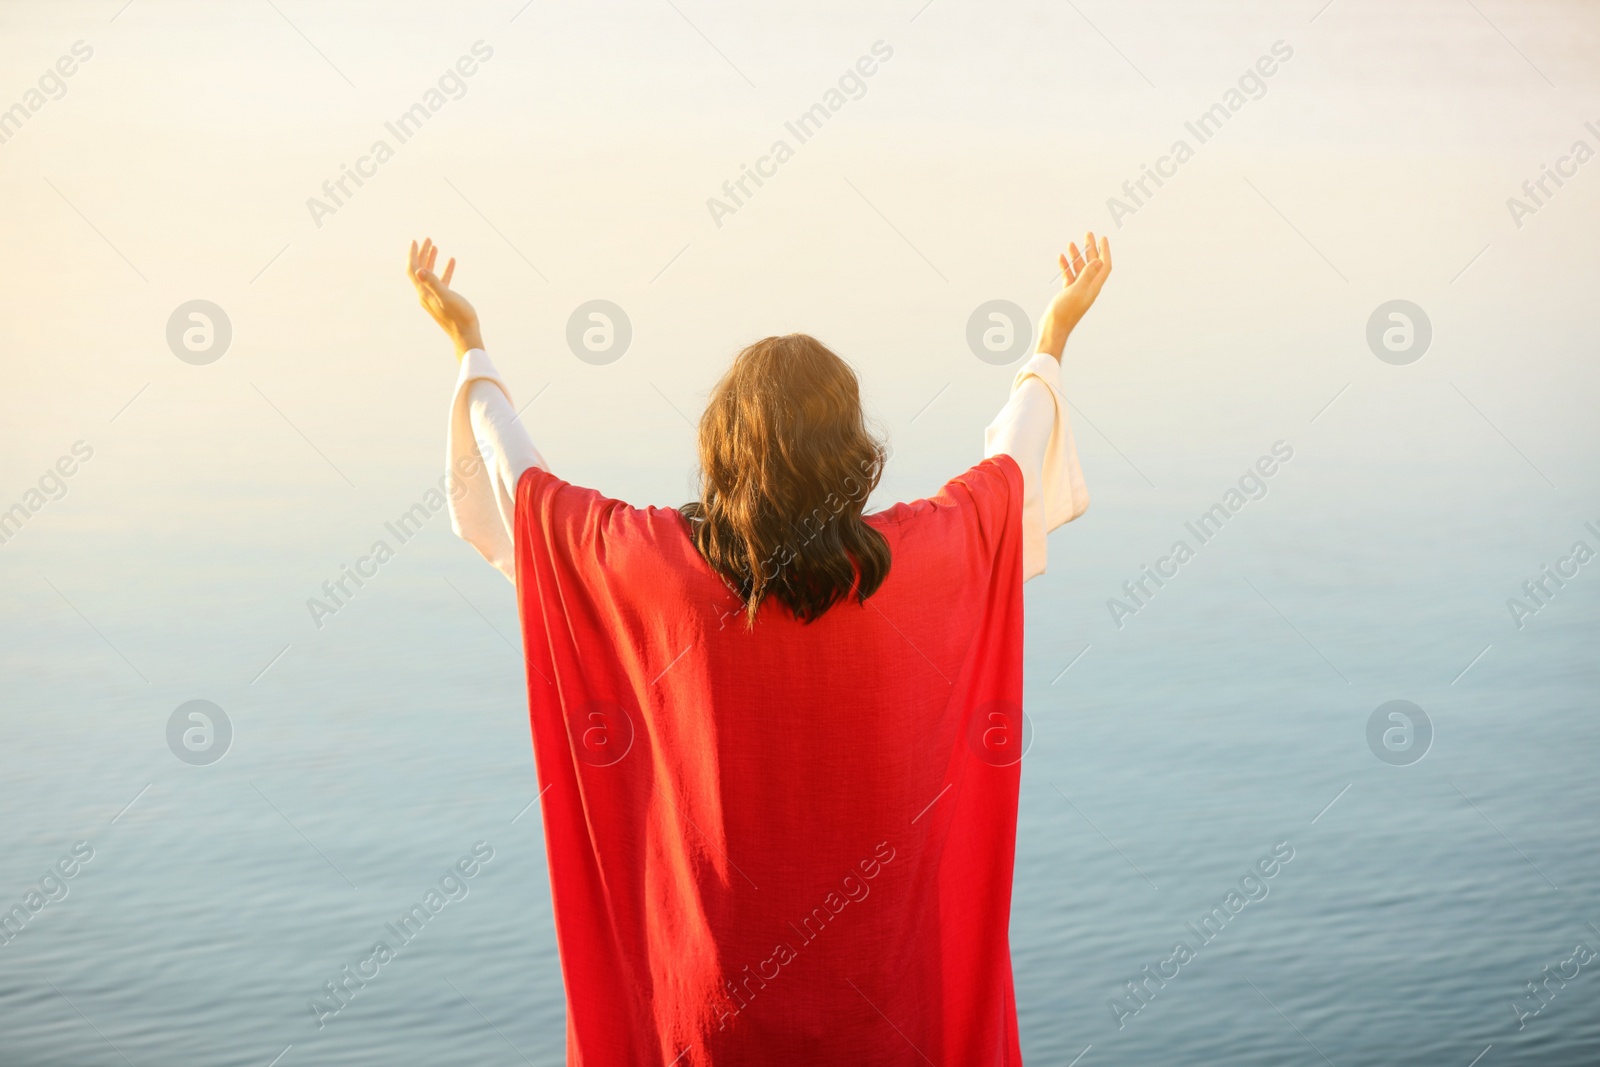 Photo of Jesus Christ raising hands near water outdoors, back view